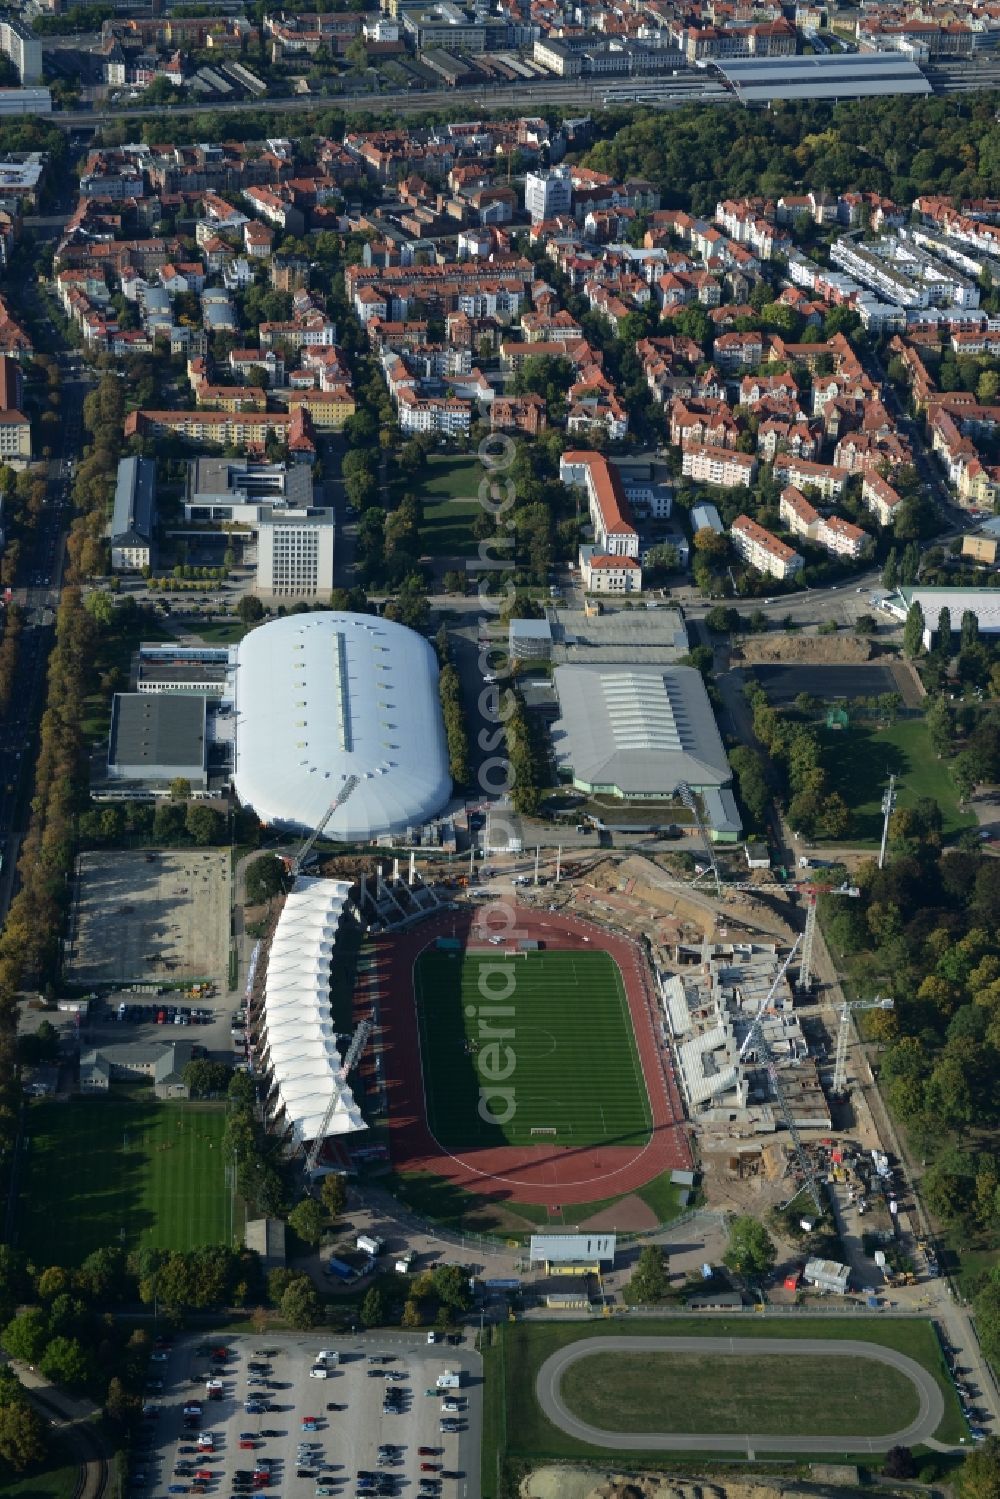 Aerial photograph Erfurt - Site for the reconstruction of the Arena stadium Steigerwaldstadion in Erfurt in Thuringia. The construction company Koester GmbH build after drafts of Architetur HPP Hentrich-Petschnigg & Partner GmbH + Co. KG a modern grandstand and sports facilities